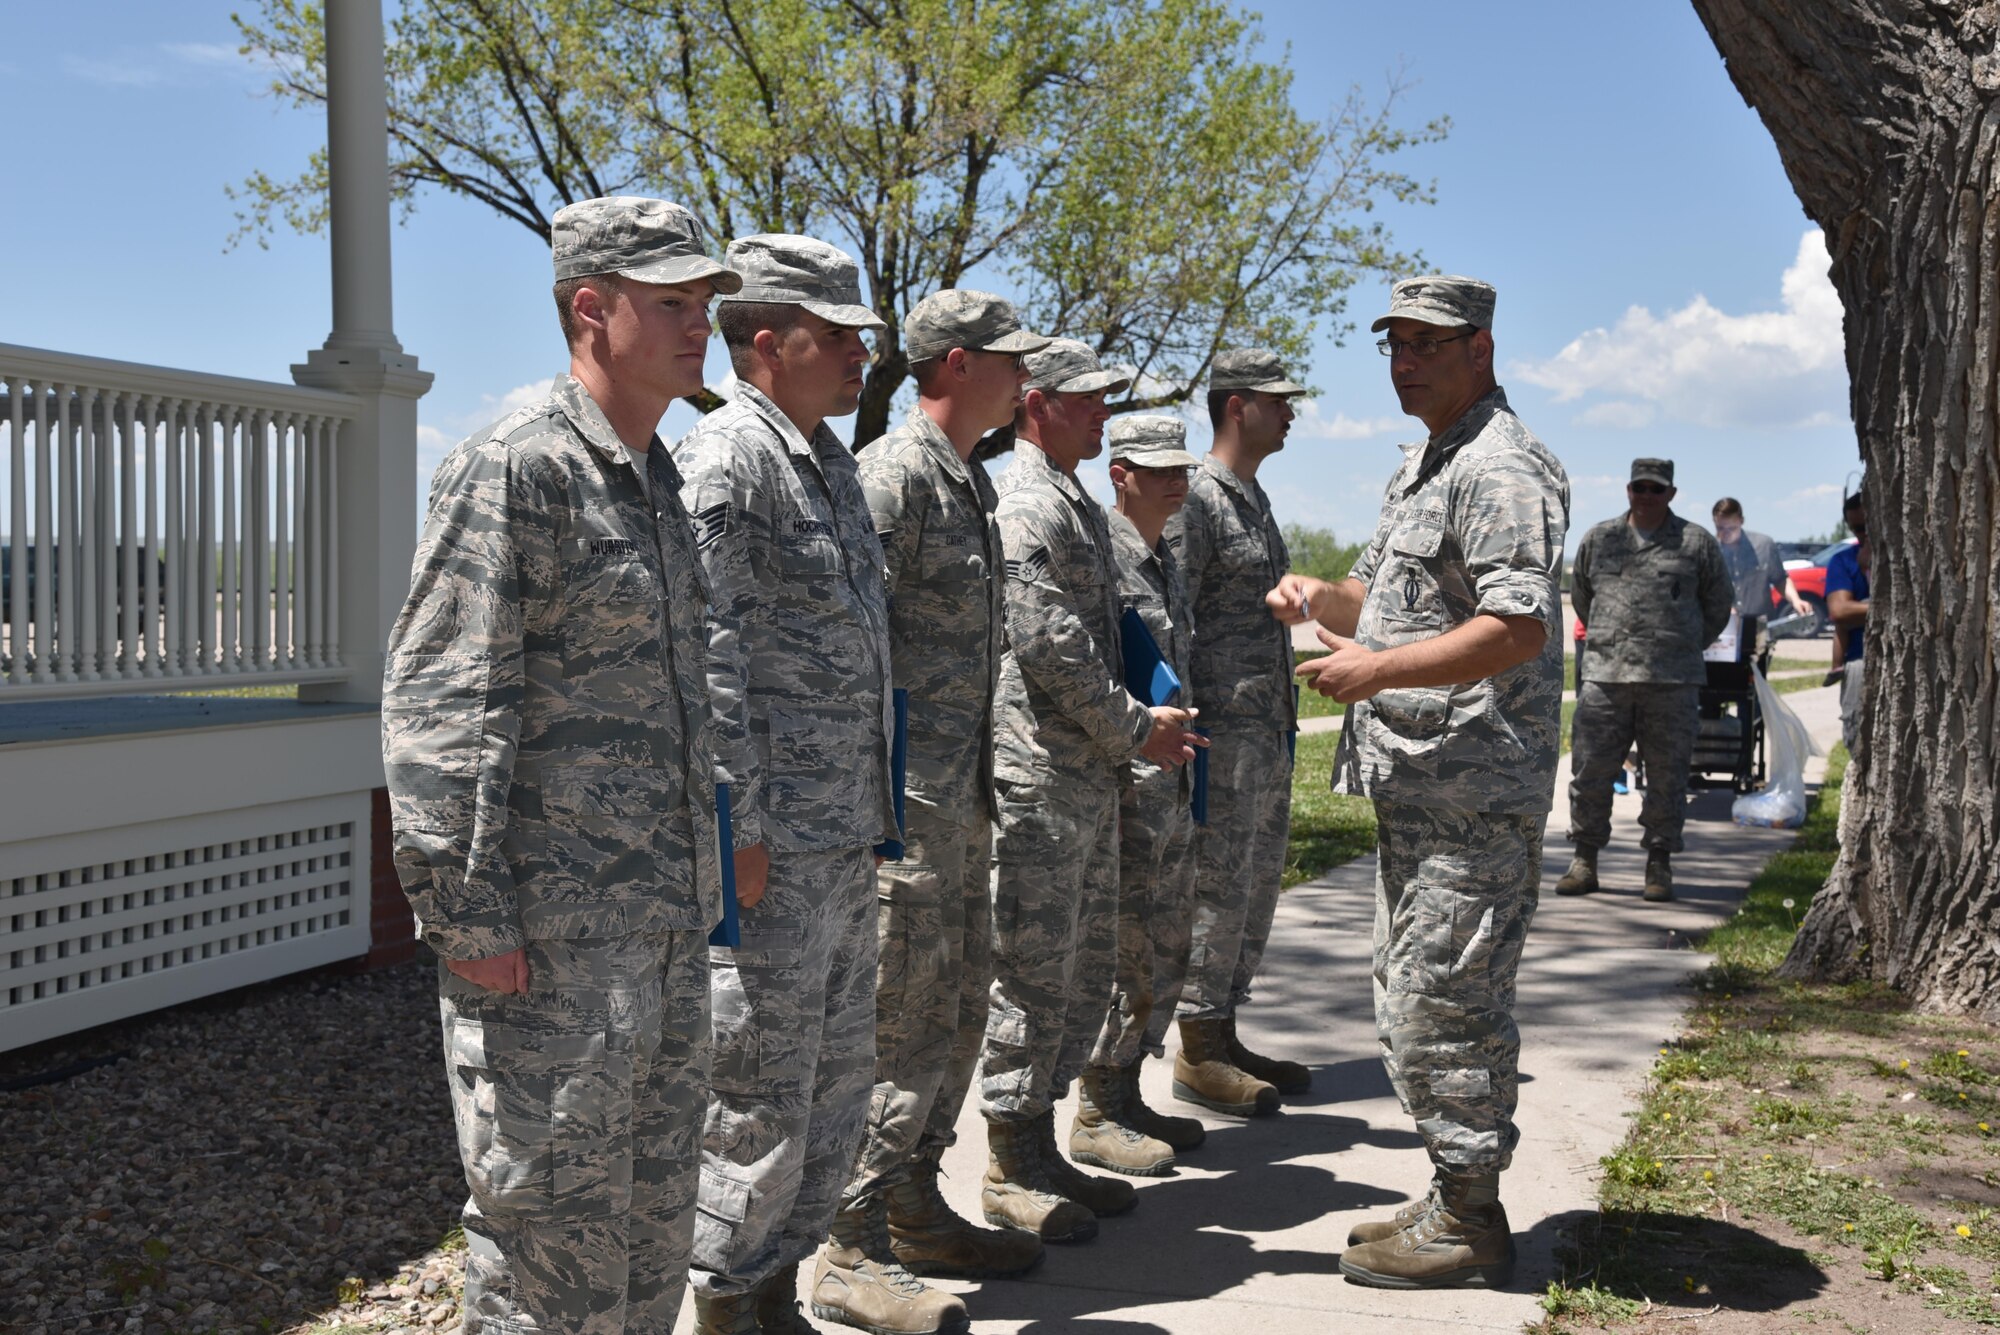 90th Civil Engineer Airmen are awarded the Air Force Achievement medal and receive coins from Col. Stephen Kravitsky, 90th Missile Wing commander for the restoration of the historic Fort D. A. Russell Army post headquarters at F.E. Warren Air Force Base, Wyo., June 8, 2017. The renovation project served a dual purpose by providing a rare training opportunity to prepare civil engineer Airmen for their responsibilities when deployed to foreign countries. Building 210 will act as the MSG headquarters and a receptions hall for Distinguished Visitors. (U.S. Air Force photo by 2nd Lt. Nikita Thorpe)